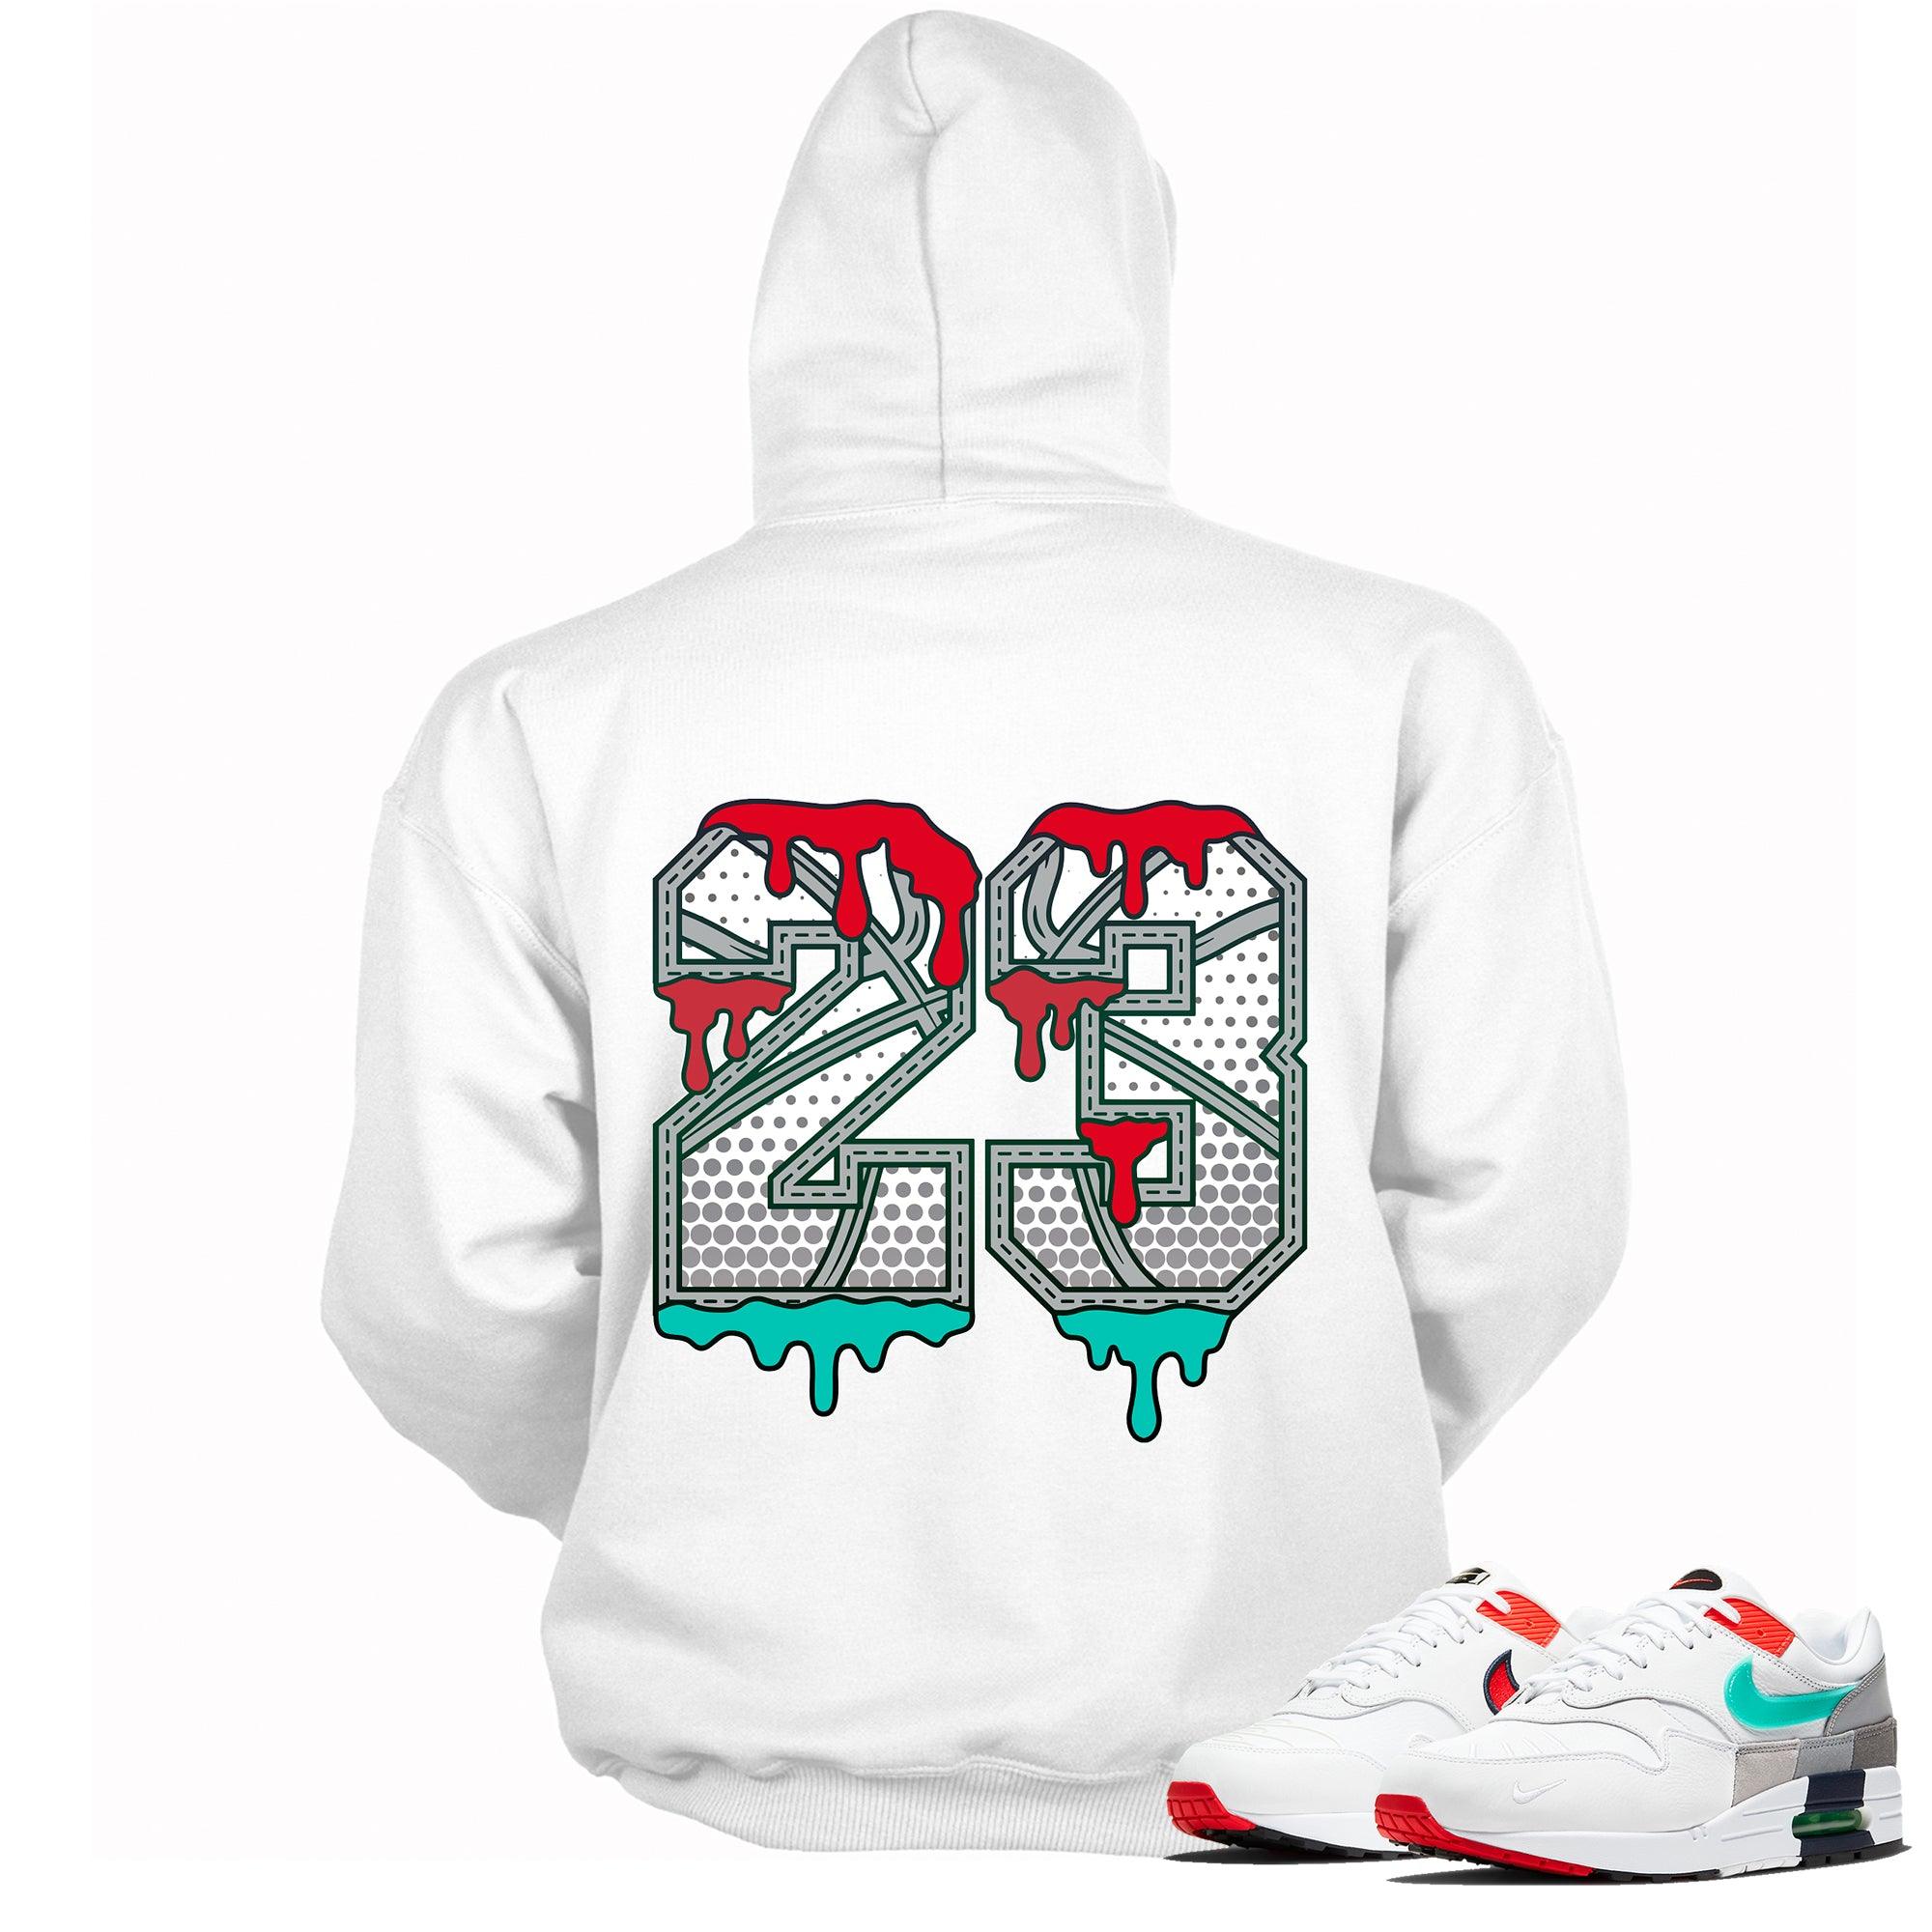 Number 23 Ball Hoodie Nike Air Max 1 Evolution Of Icons photo